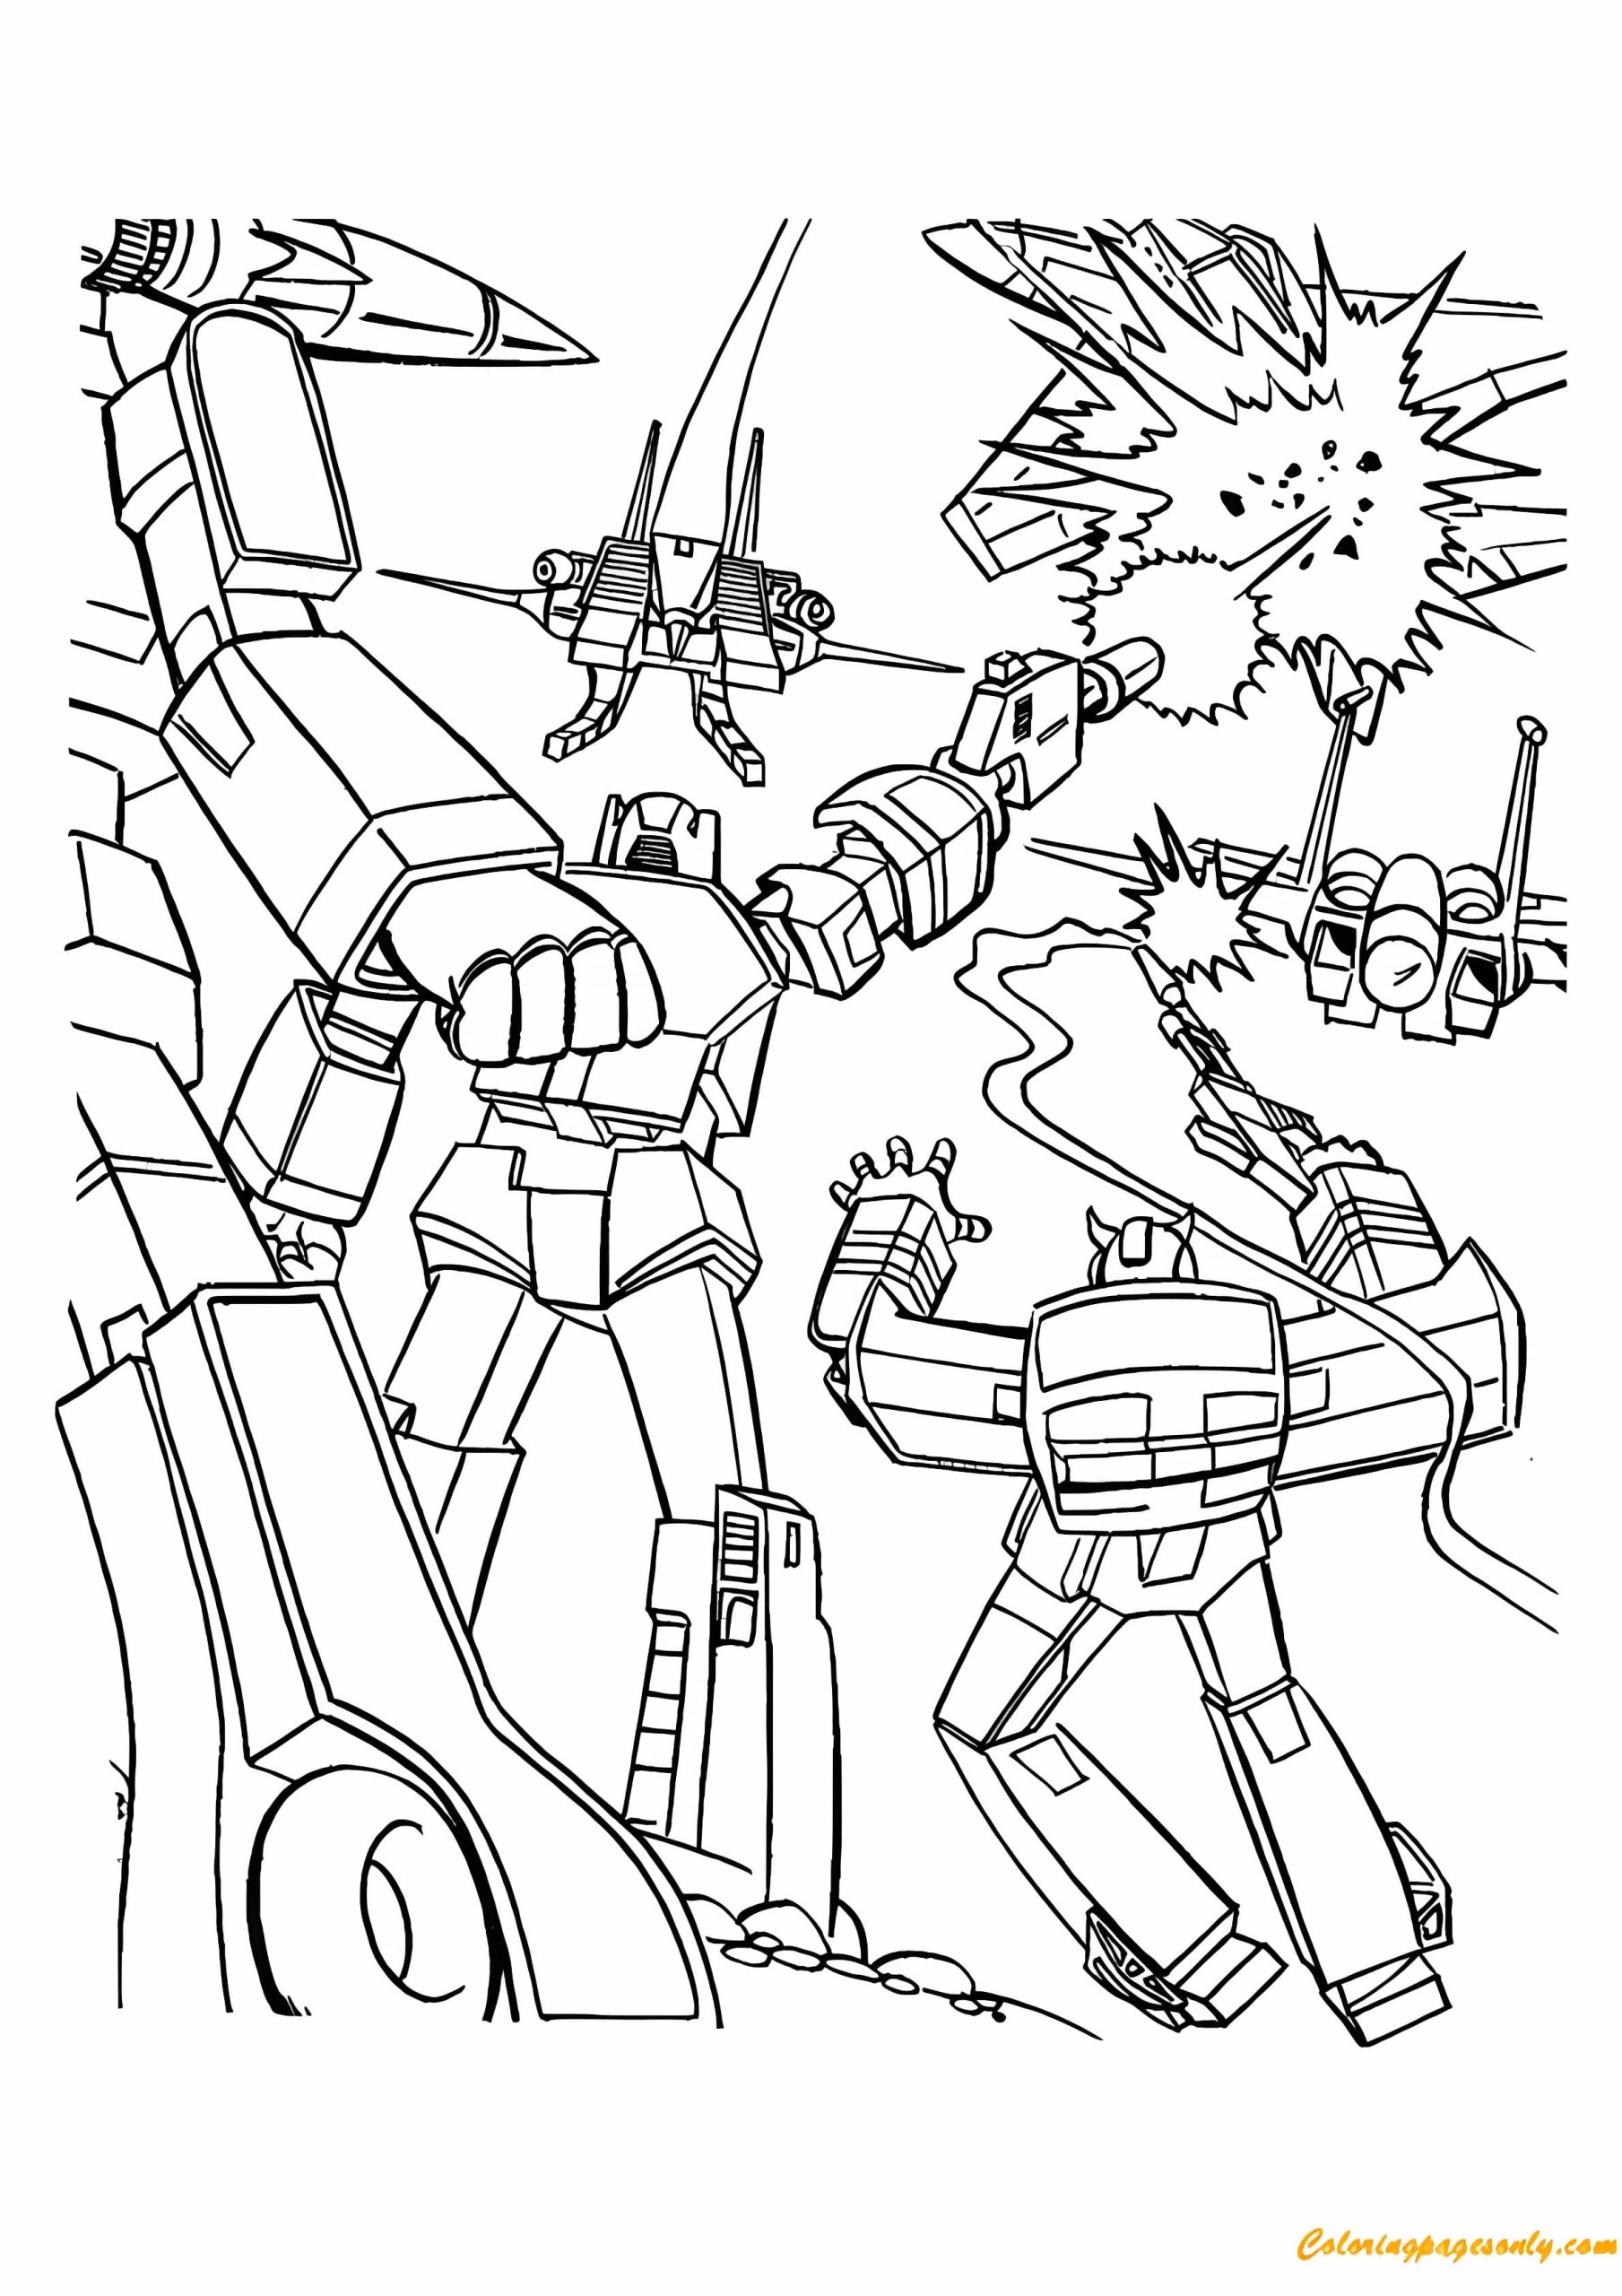 The War Time Coloring Pages